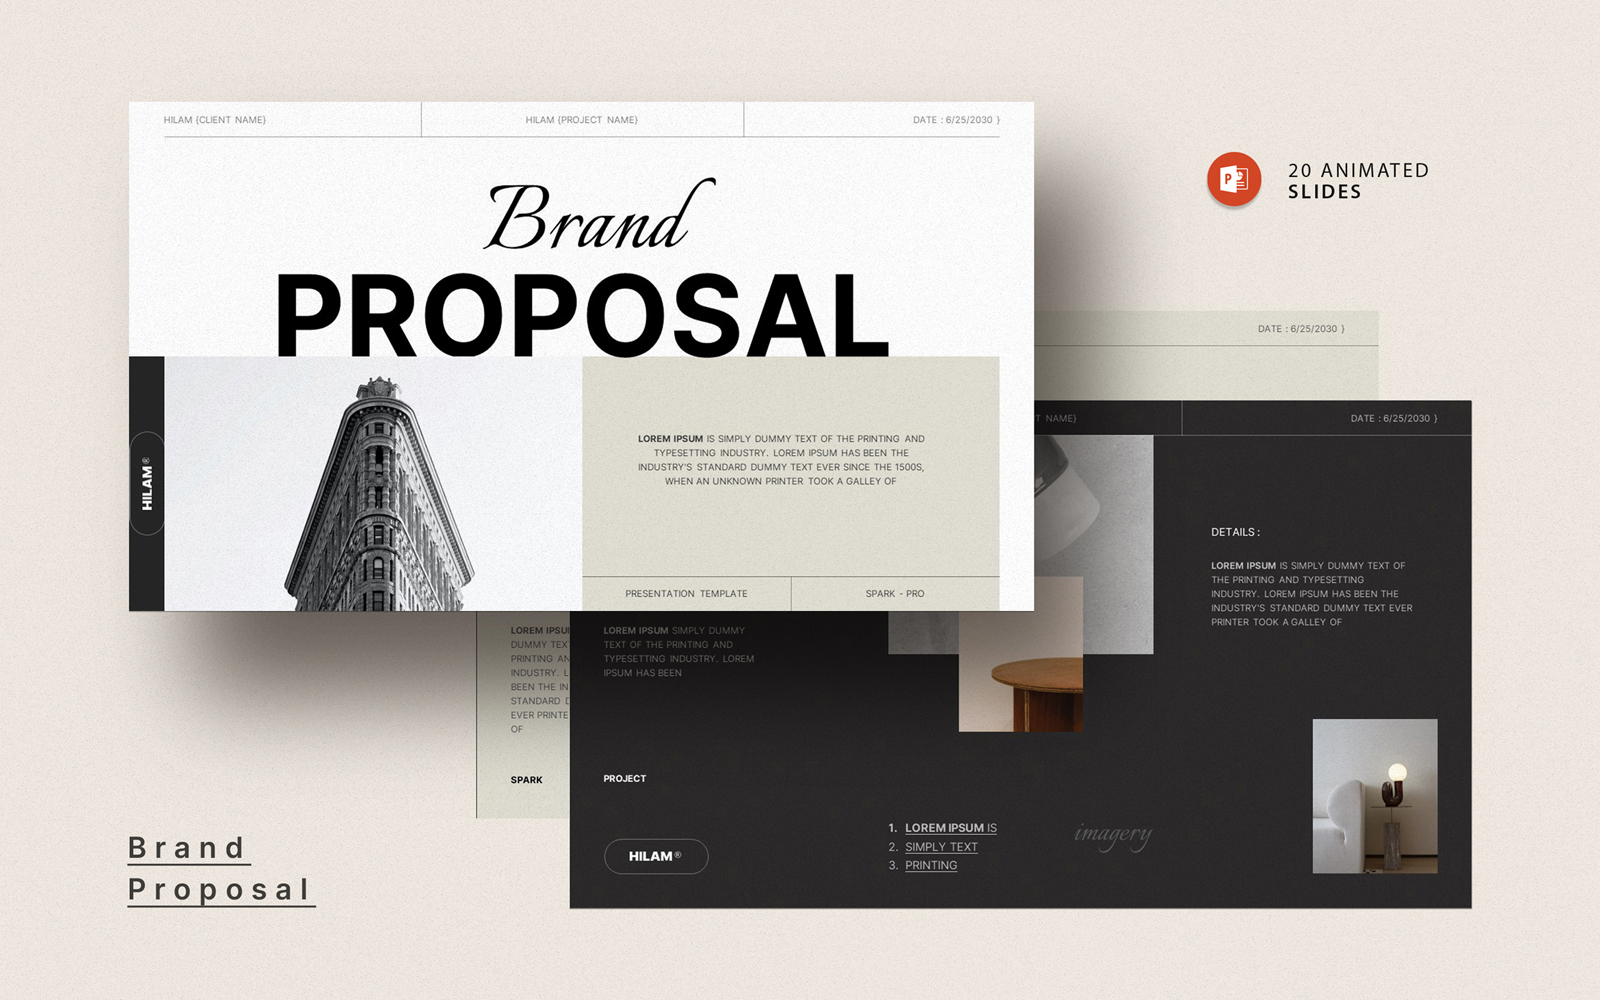 Brand Proposal Powerpoint Layout